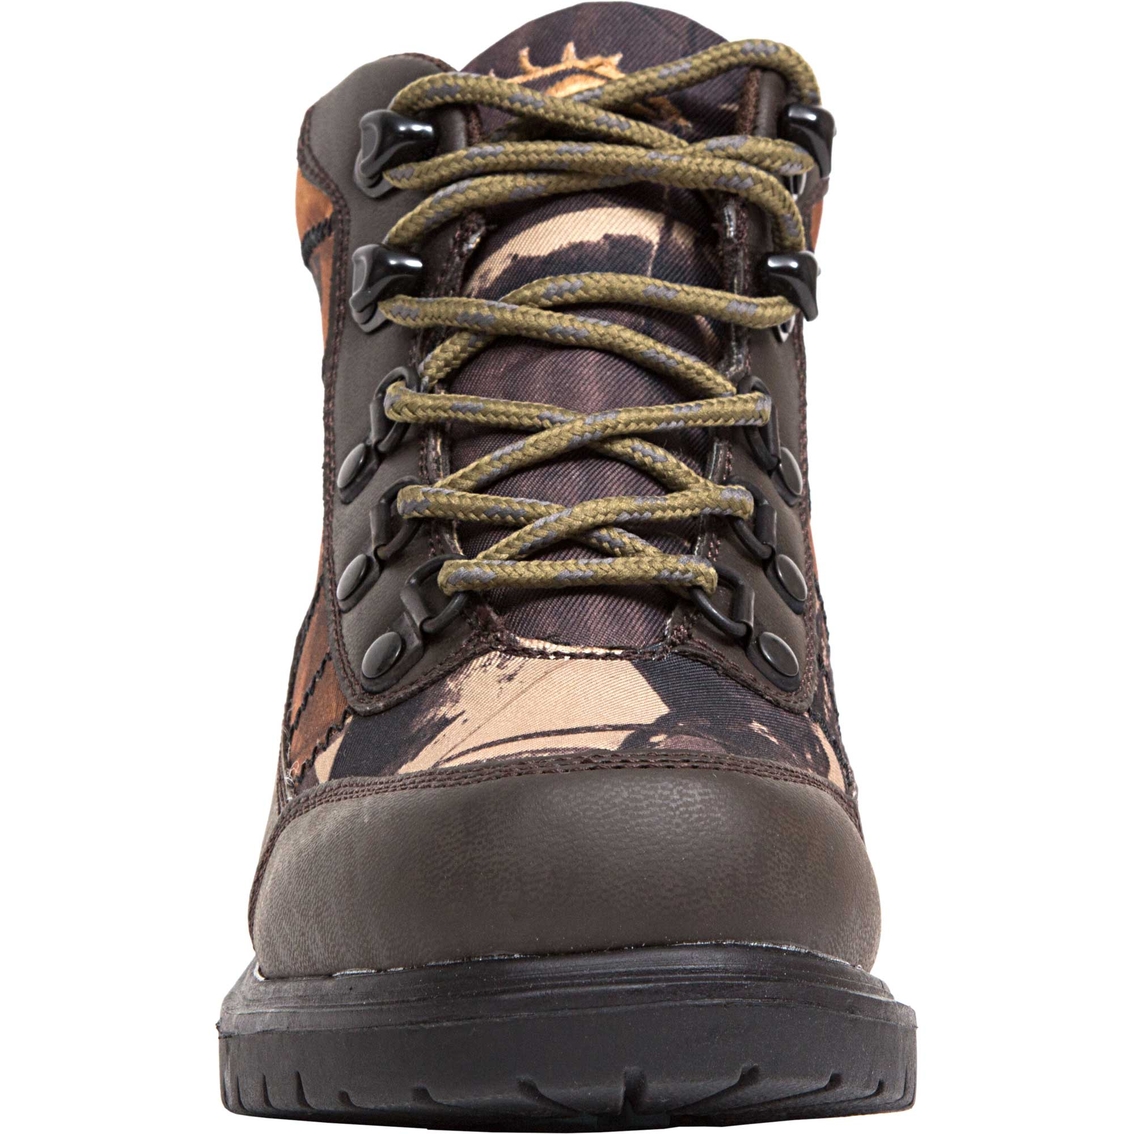 Deer Stags Boys Hunt Camo Boots - Image 3 of 6